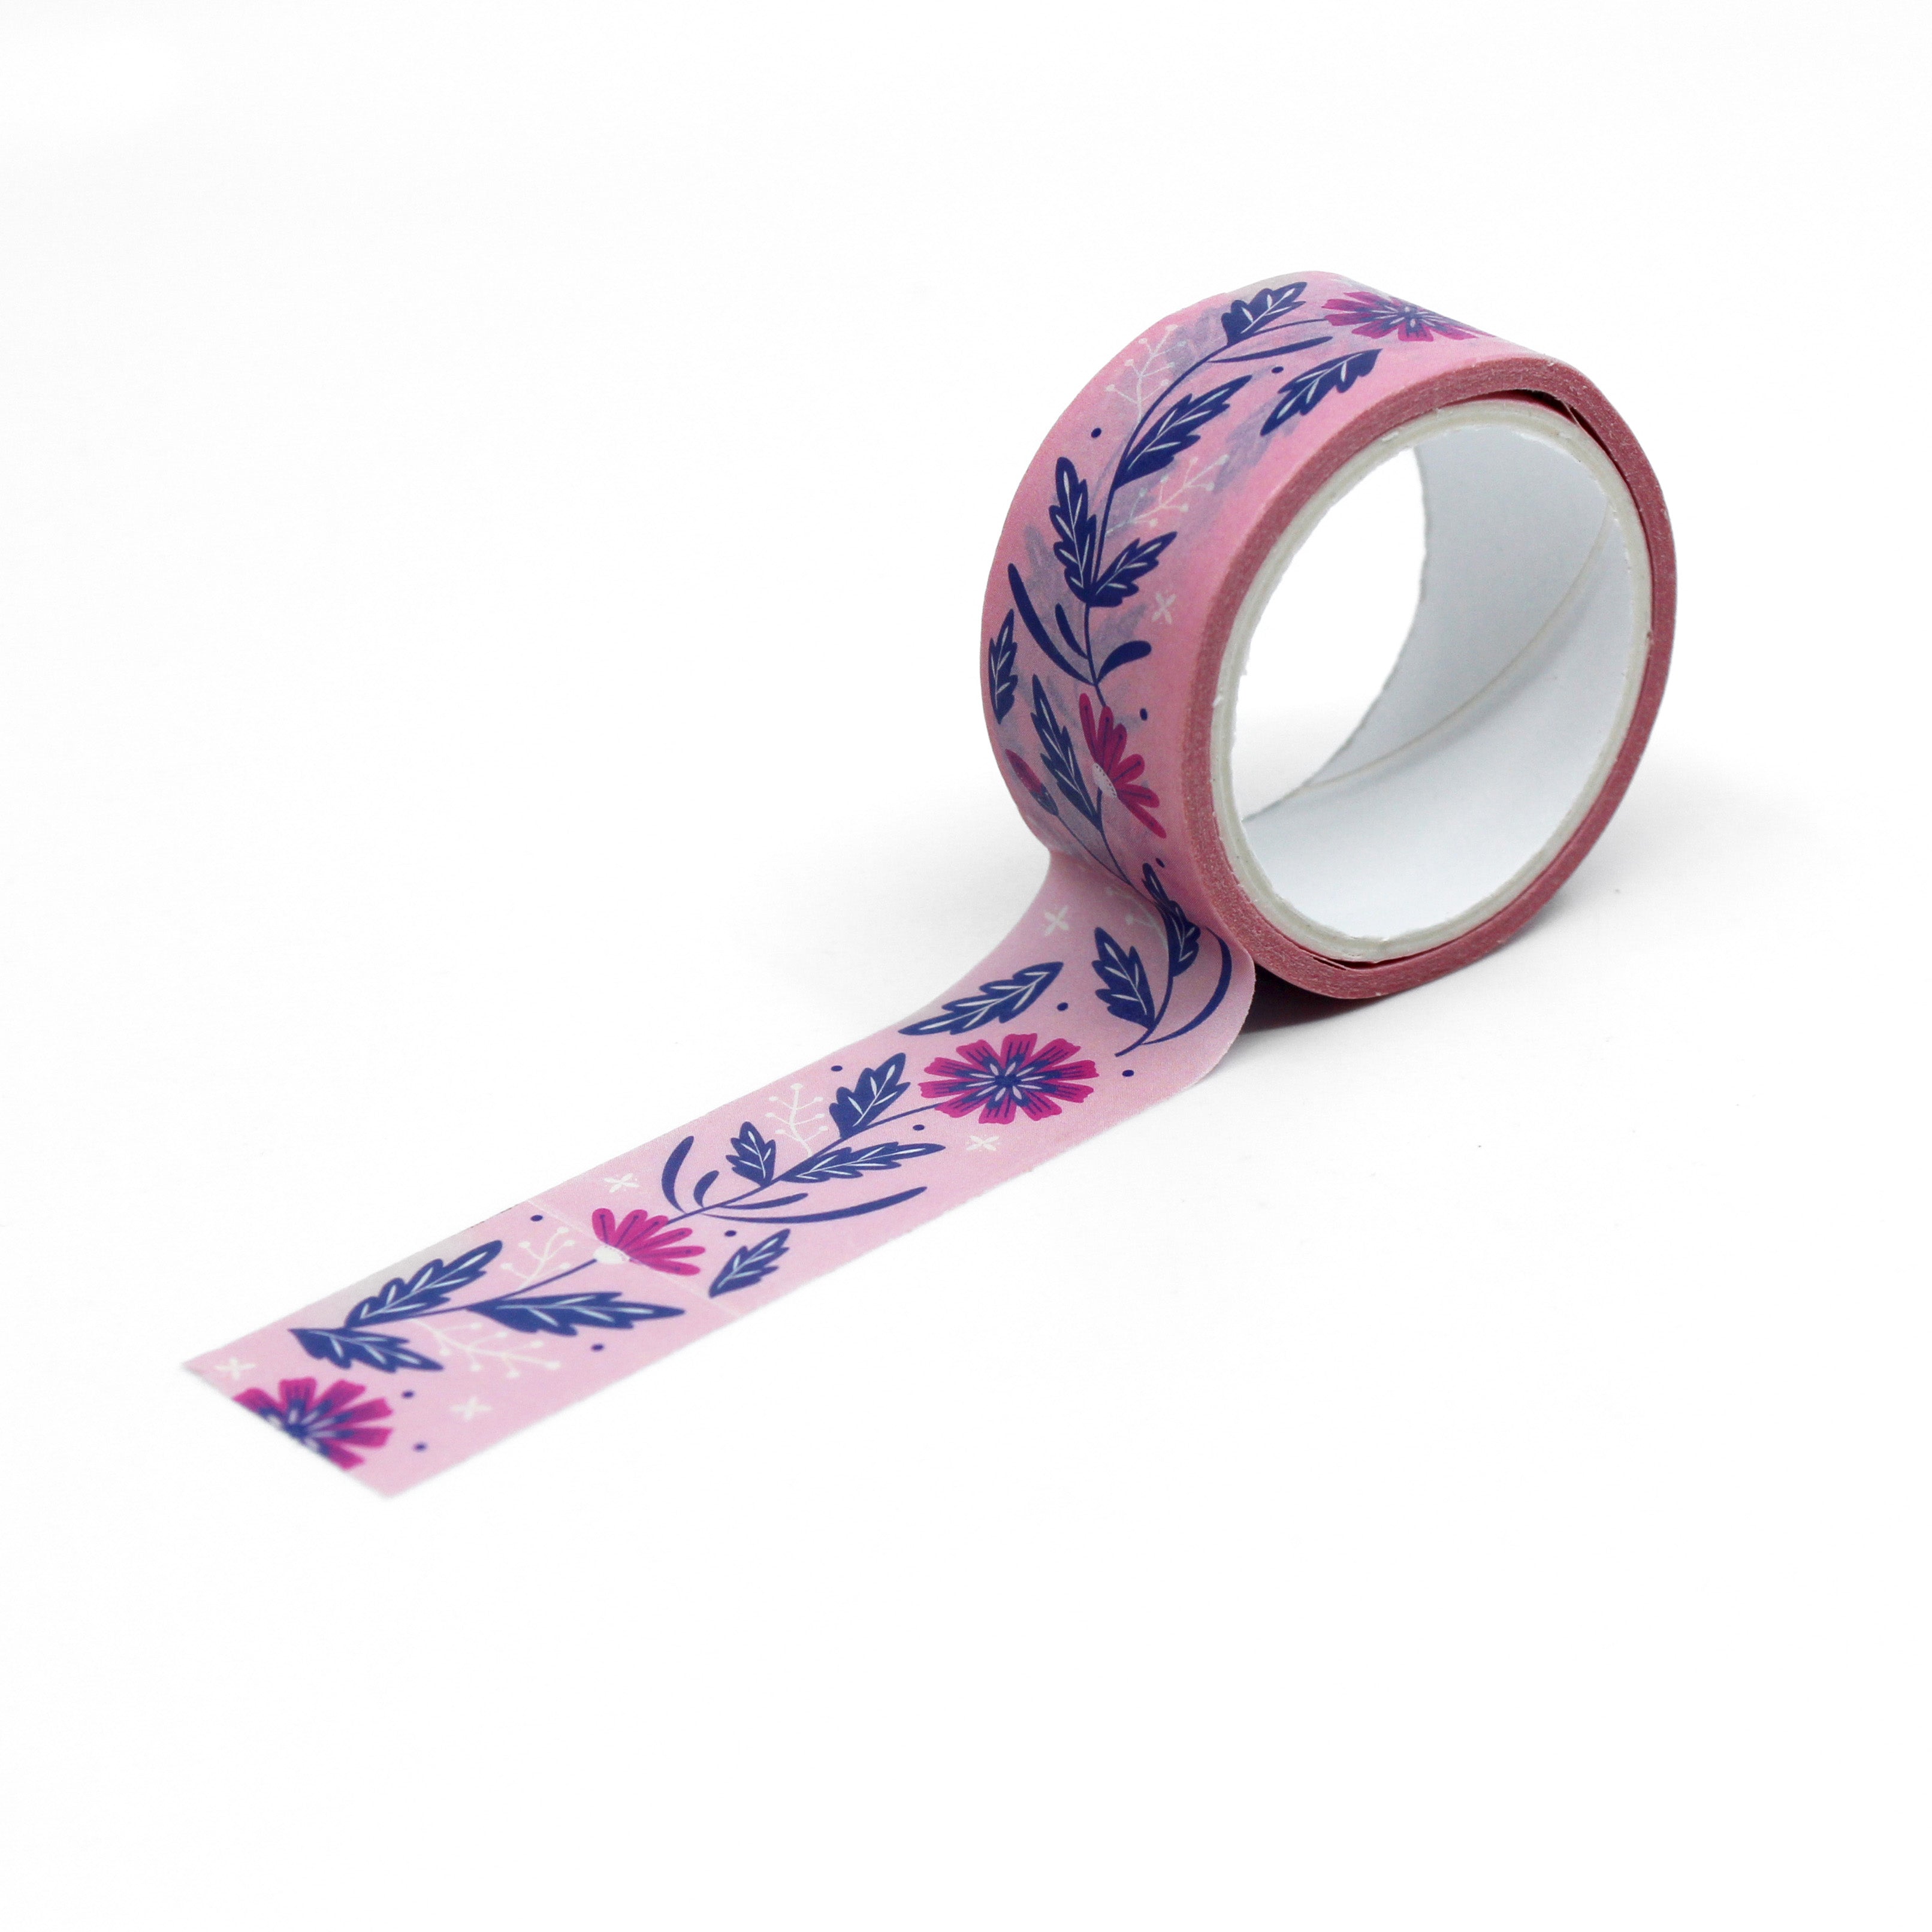 Enhance your crafts with our Pink & Blue Floral Washi Tape, featuring a delicate floral pattern in a lovely blend of pink and blue hues. Ideal for adding a touch of floral elegance to your projects. This tape is sold at BBB Supplies Craft Shop.